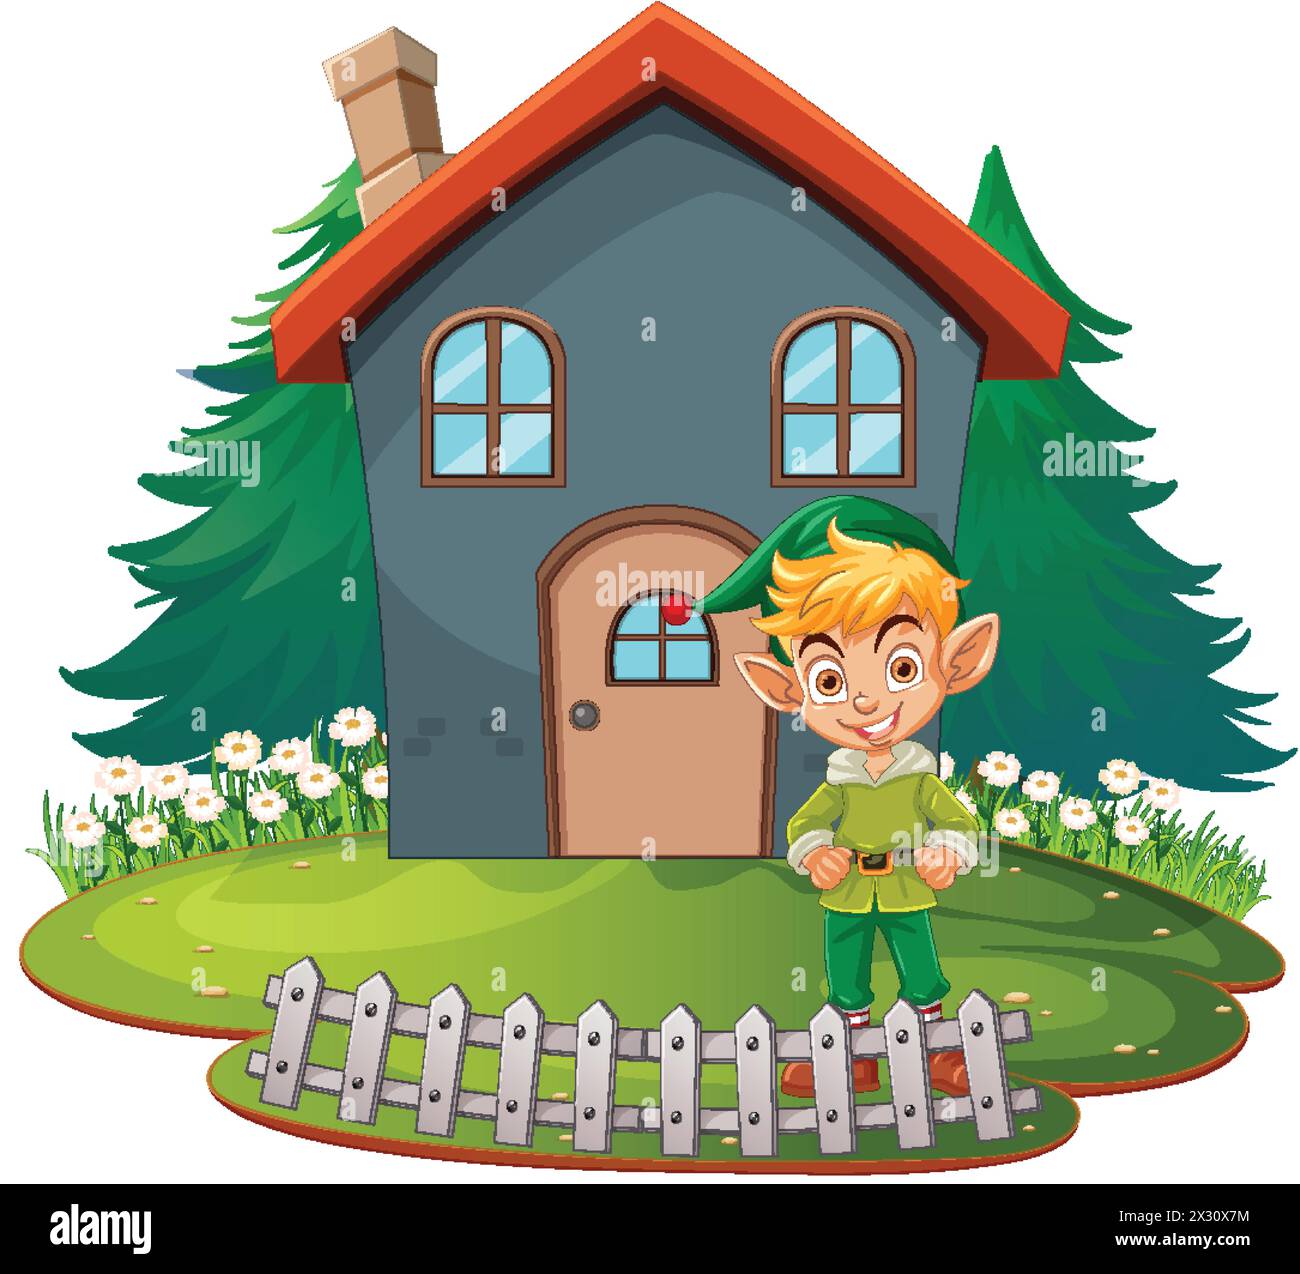 Cheerful elf standing by a whimsical house Stock Vector